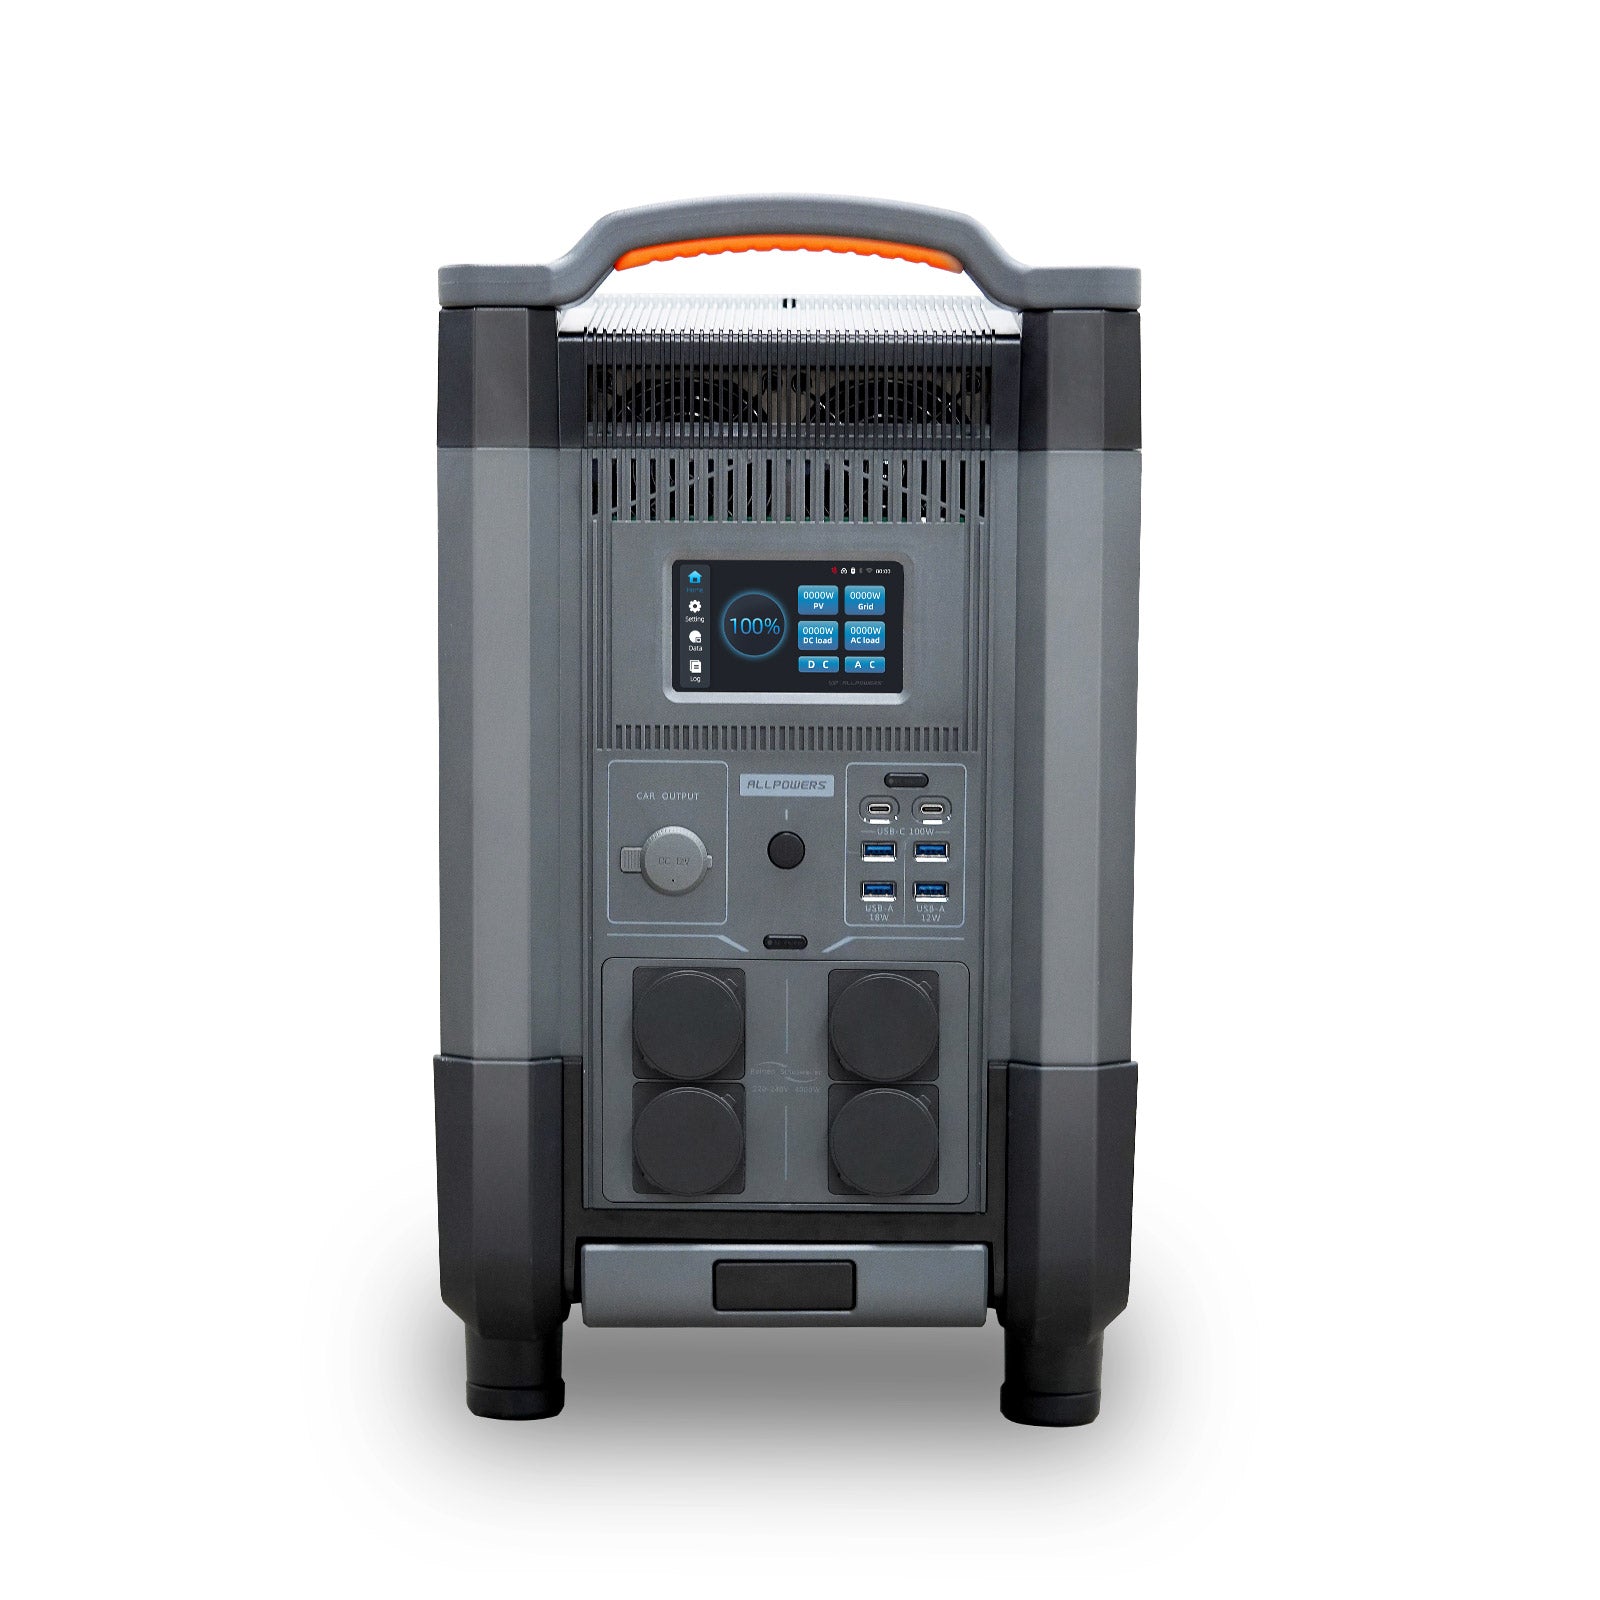 ALLPOWERS R4000 Portable Power Station 4000W 3456Wh